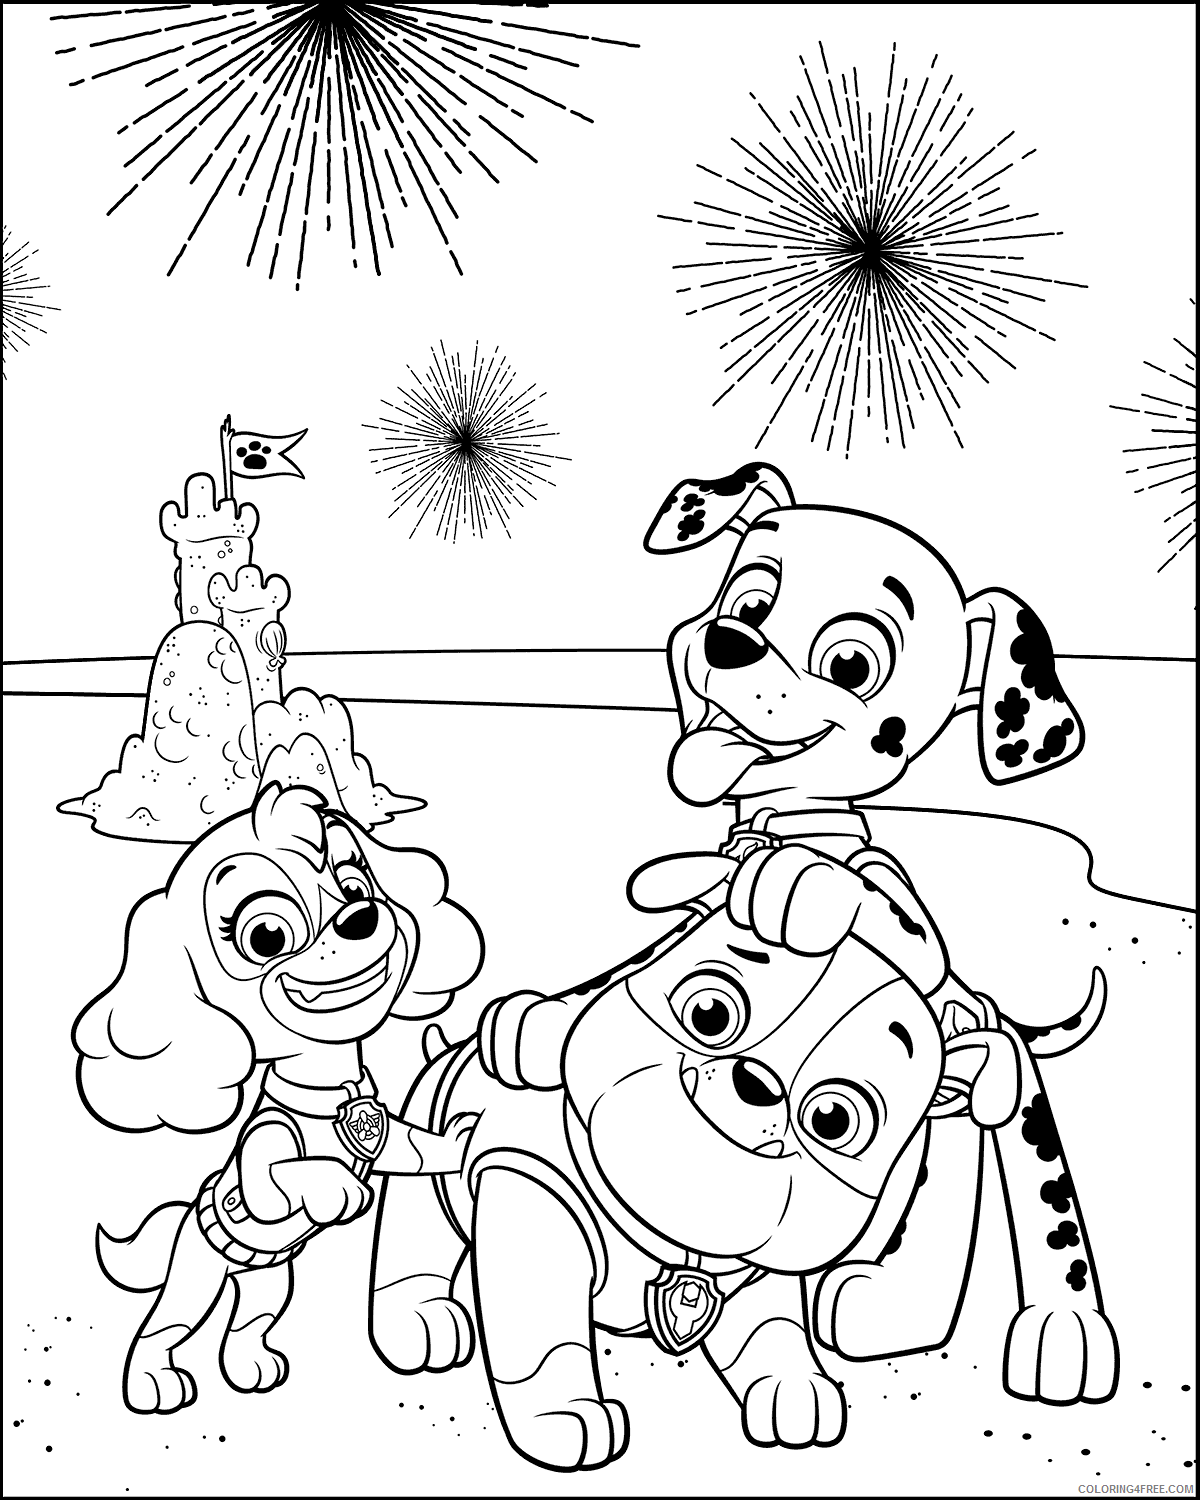 Paw Patrol Coloring Pages TV Film Paw Patrol 4th of July Printable 2020 05937 Coloring4free